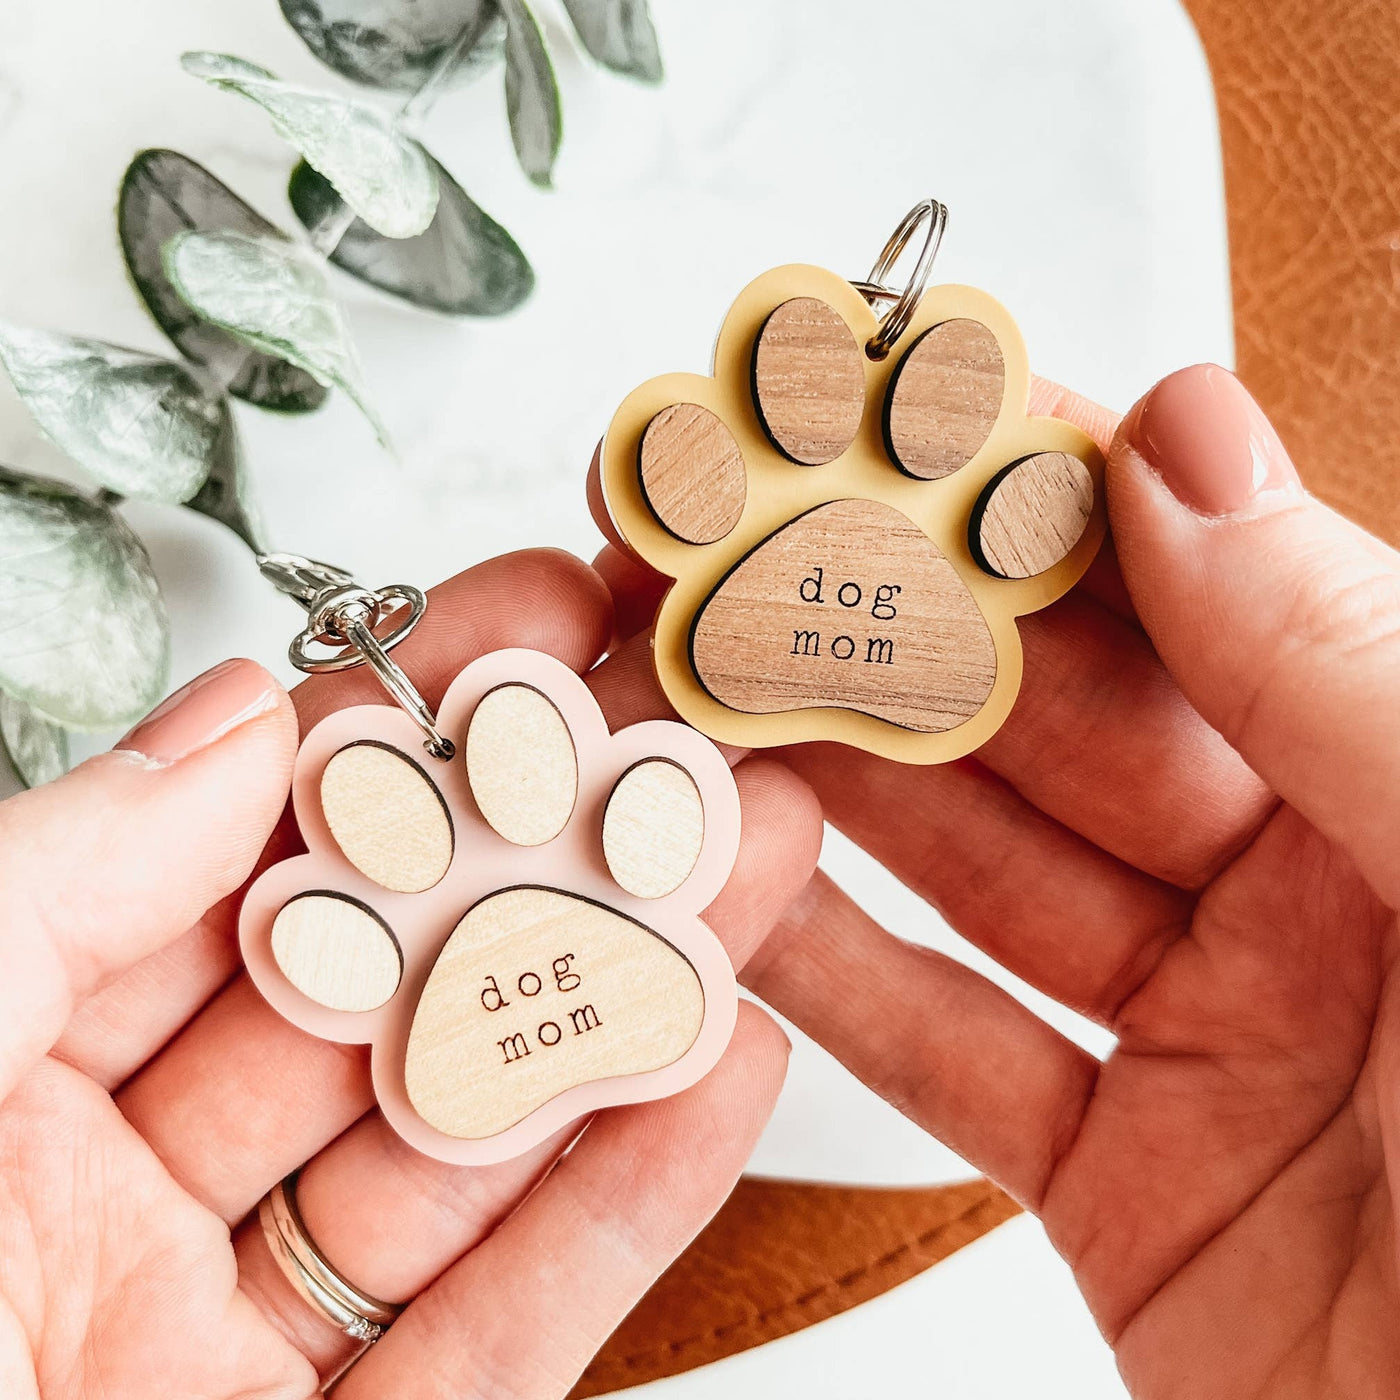 Knotty Design | Dog Mom Wood and Acrylic Keychain, The Local Space, Local Canadian Brands